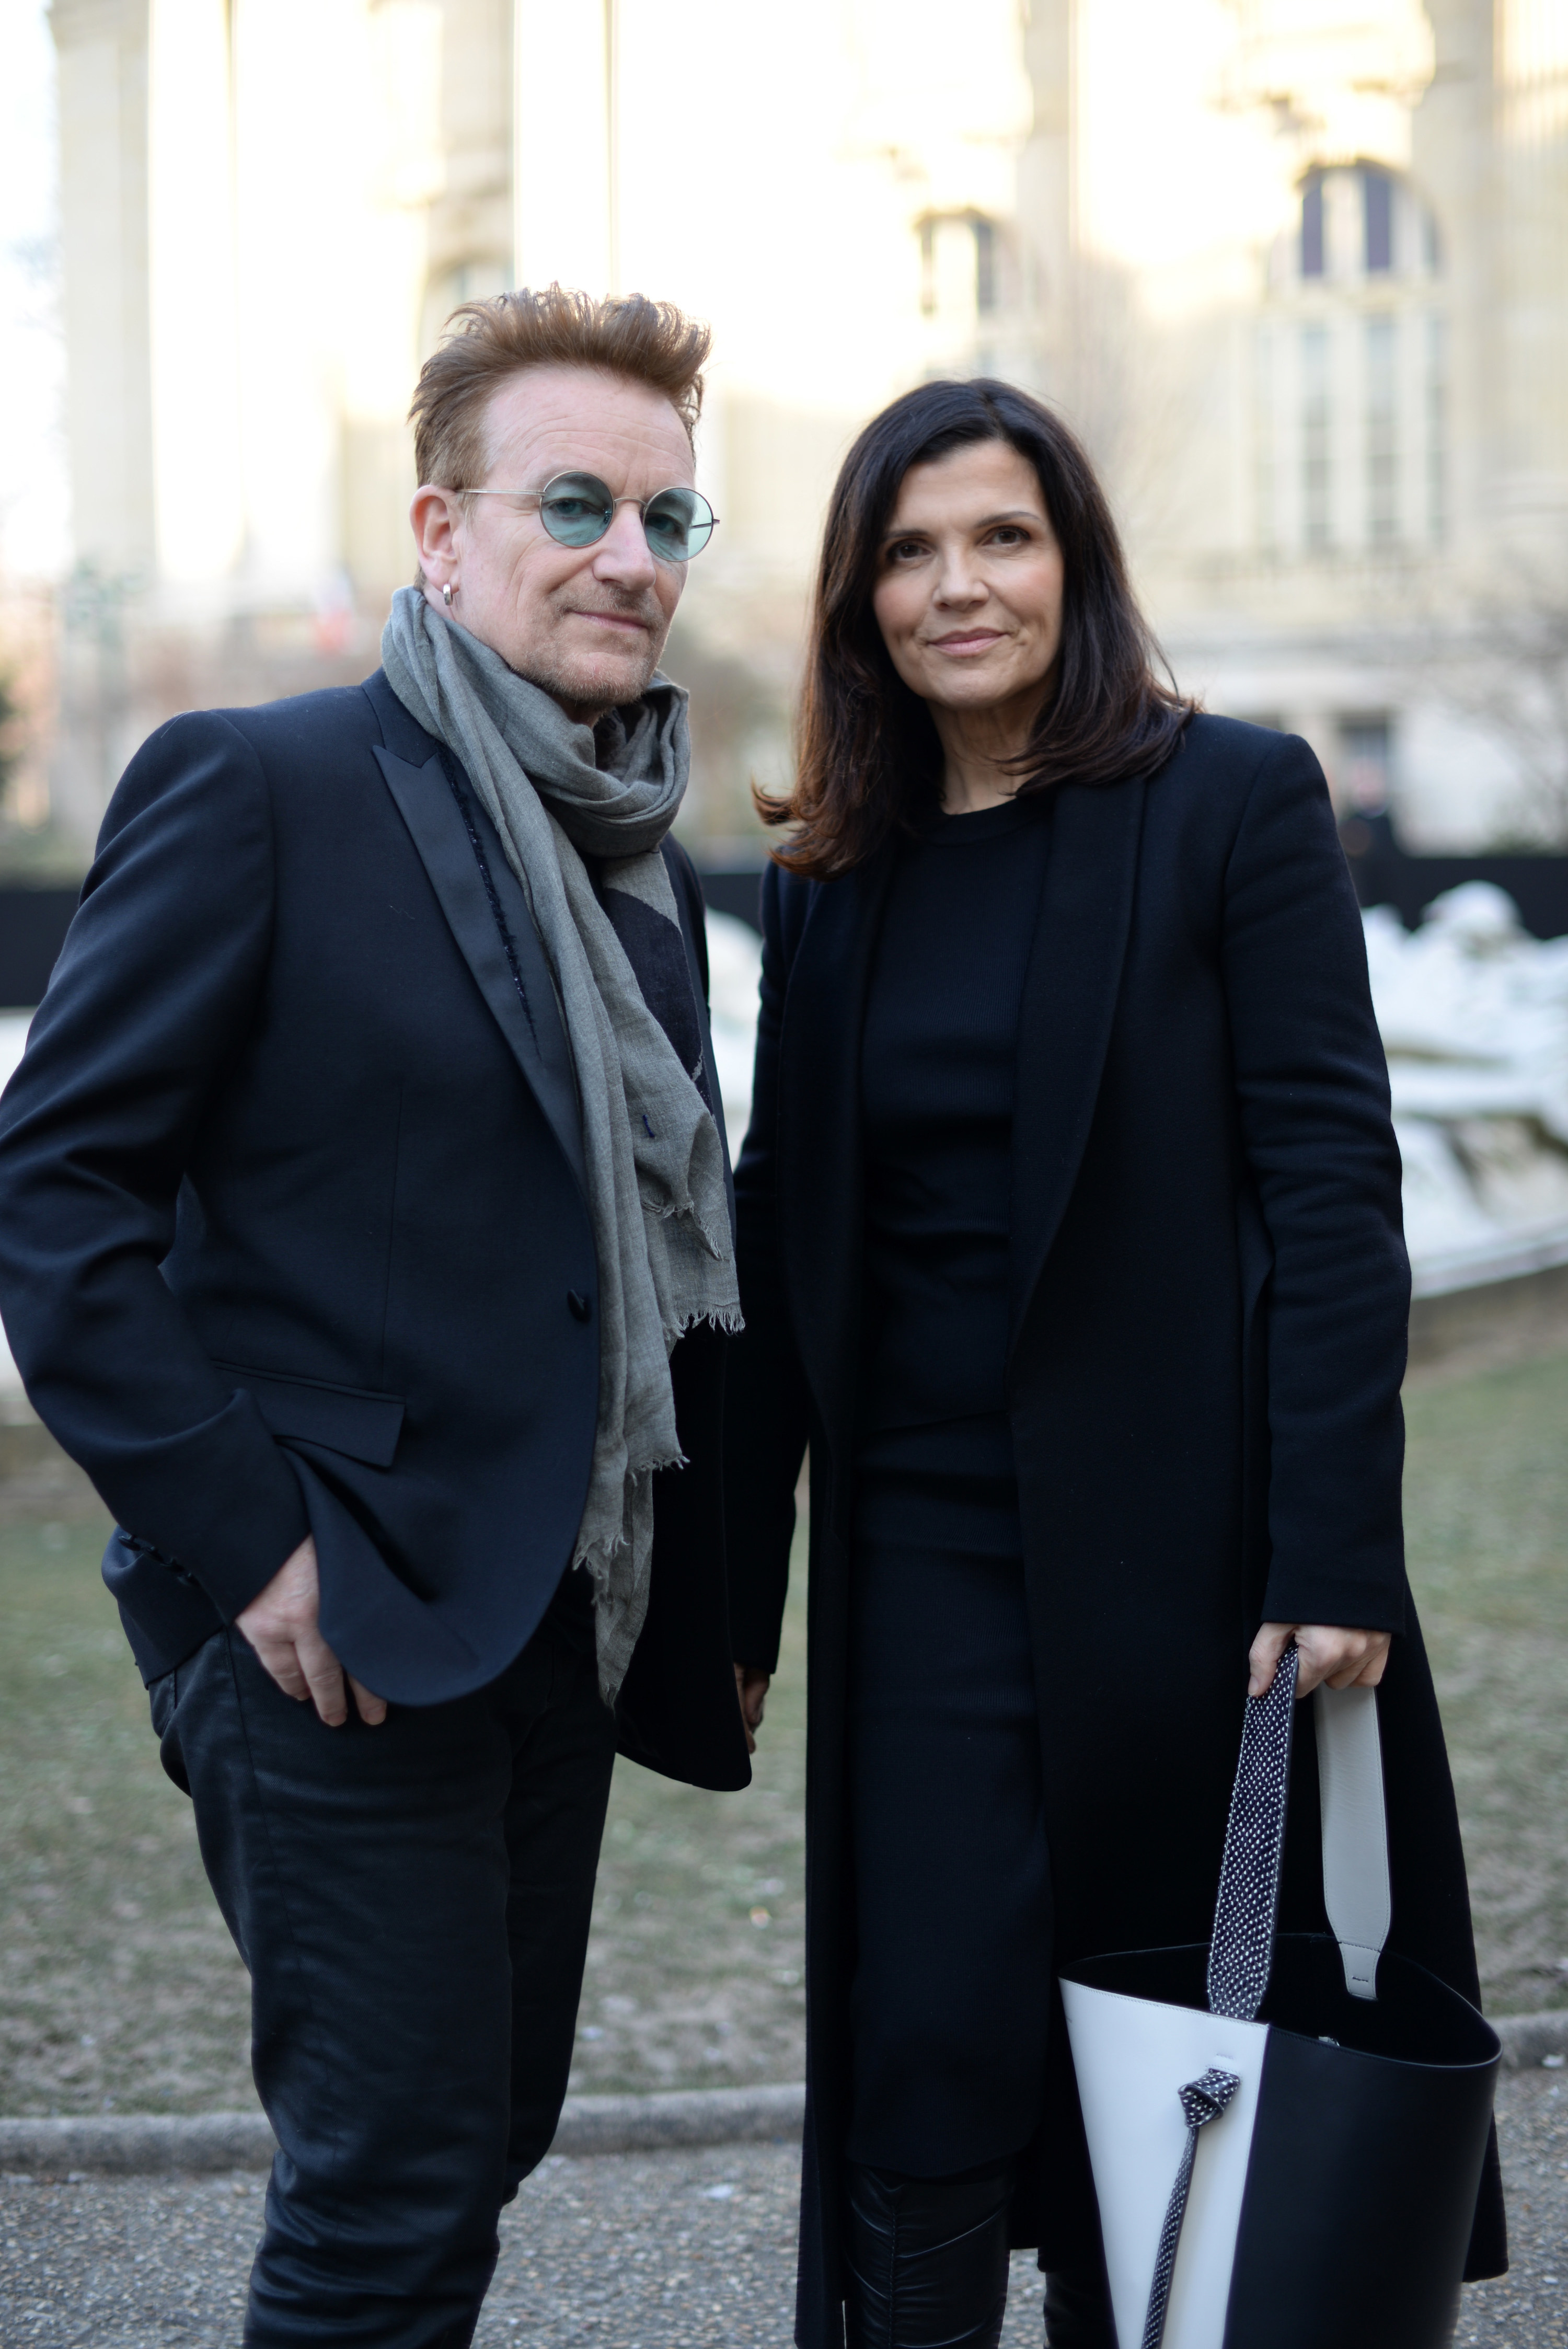 Bono and Ali Hewson are seen at the Dior Homme Menswear Fall/Winter 2017-2018 show in January 2017